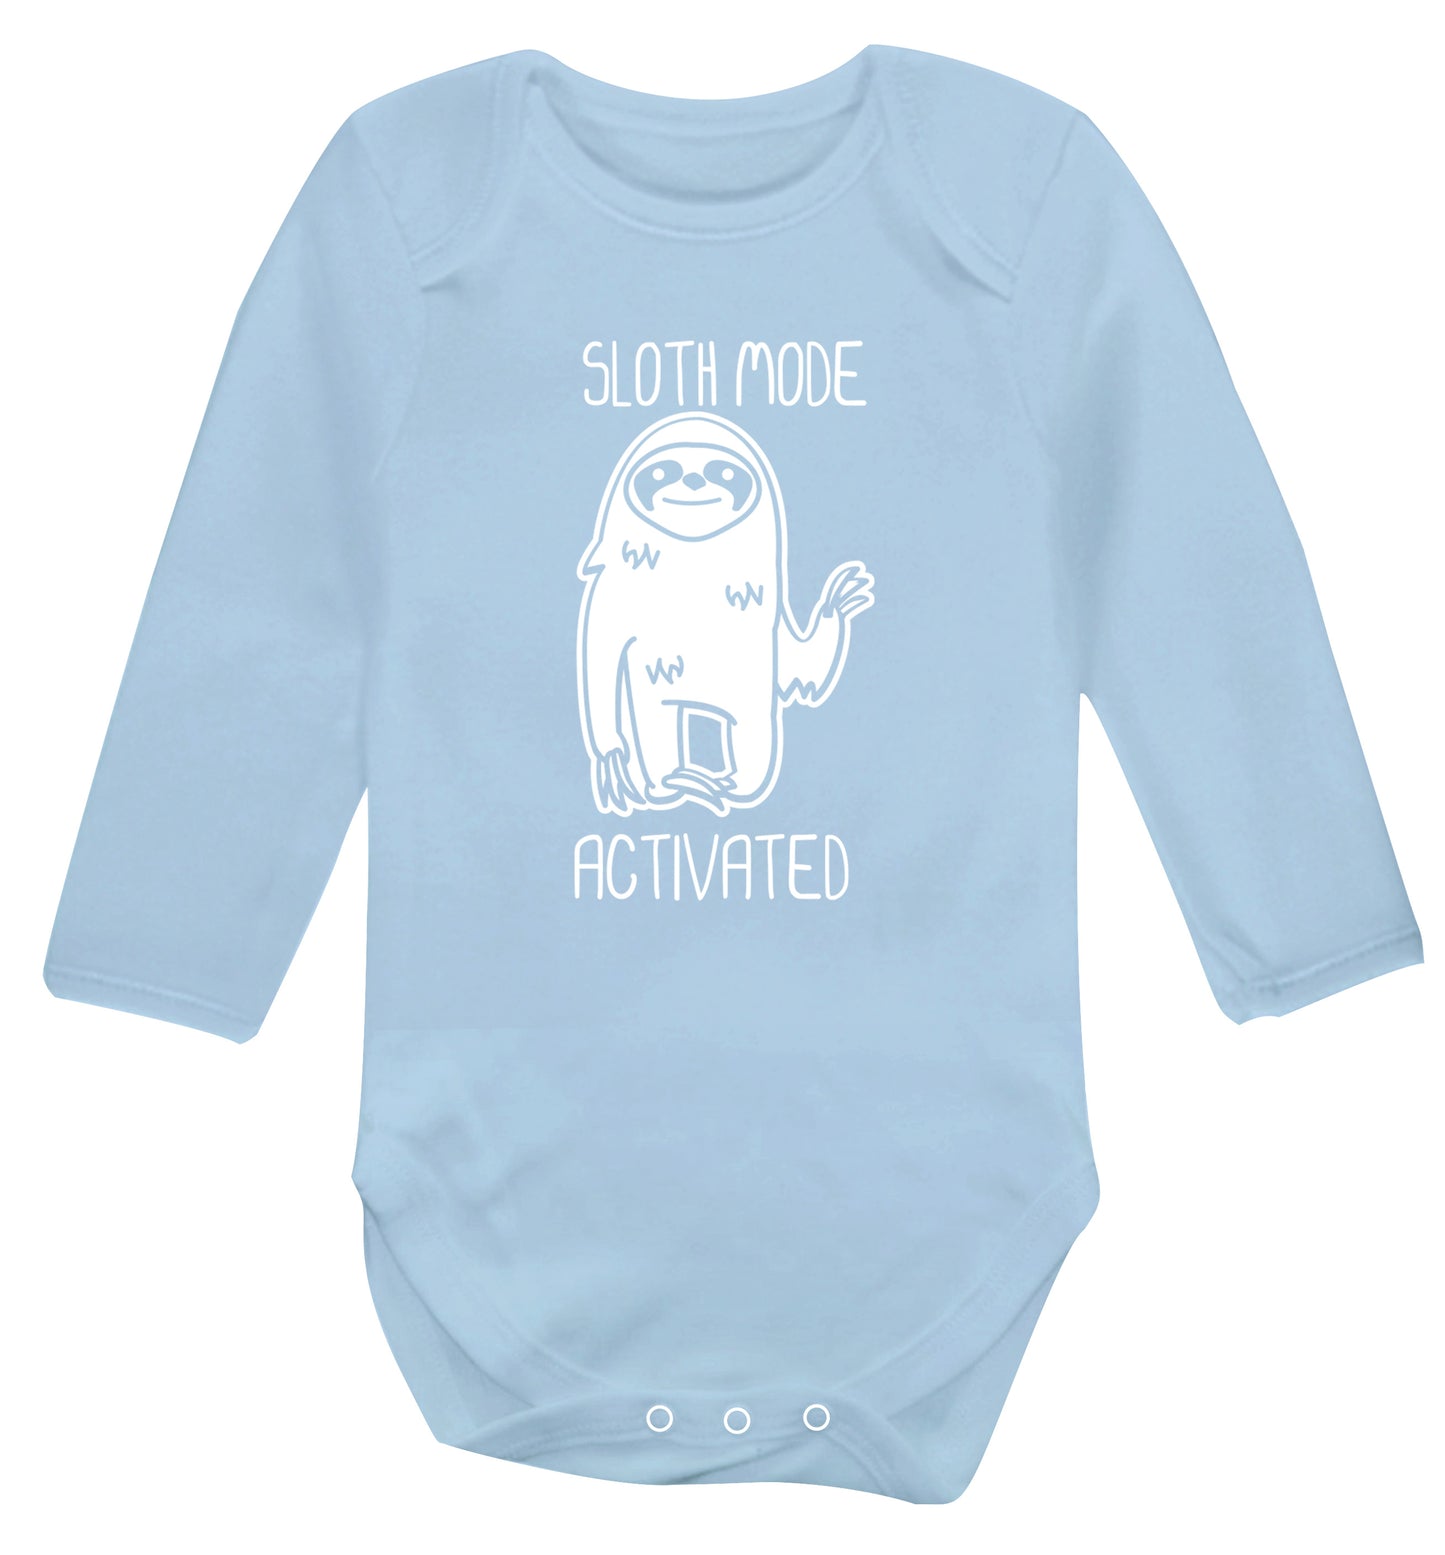 Sloth mode acitvated Baby Vest long sleeved pale blue 6-12 months